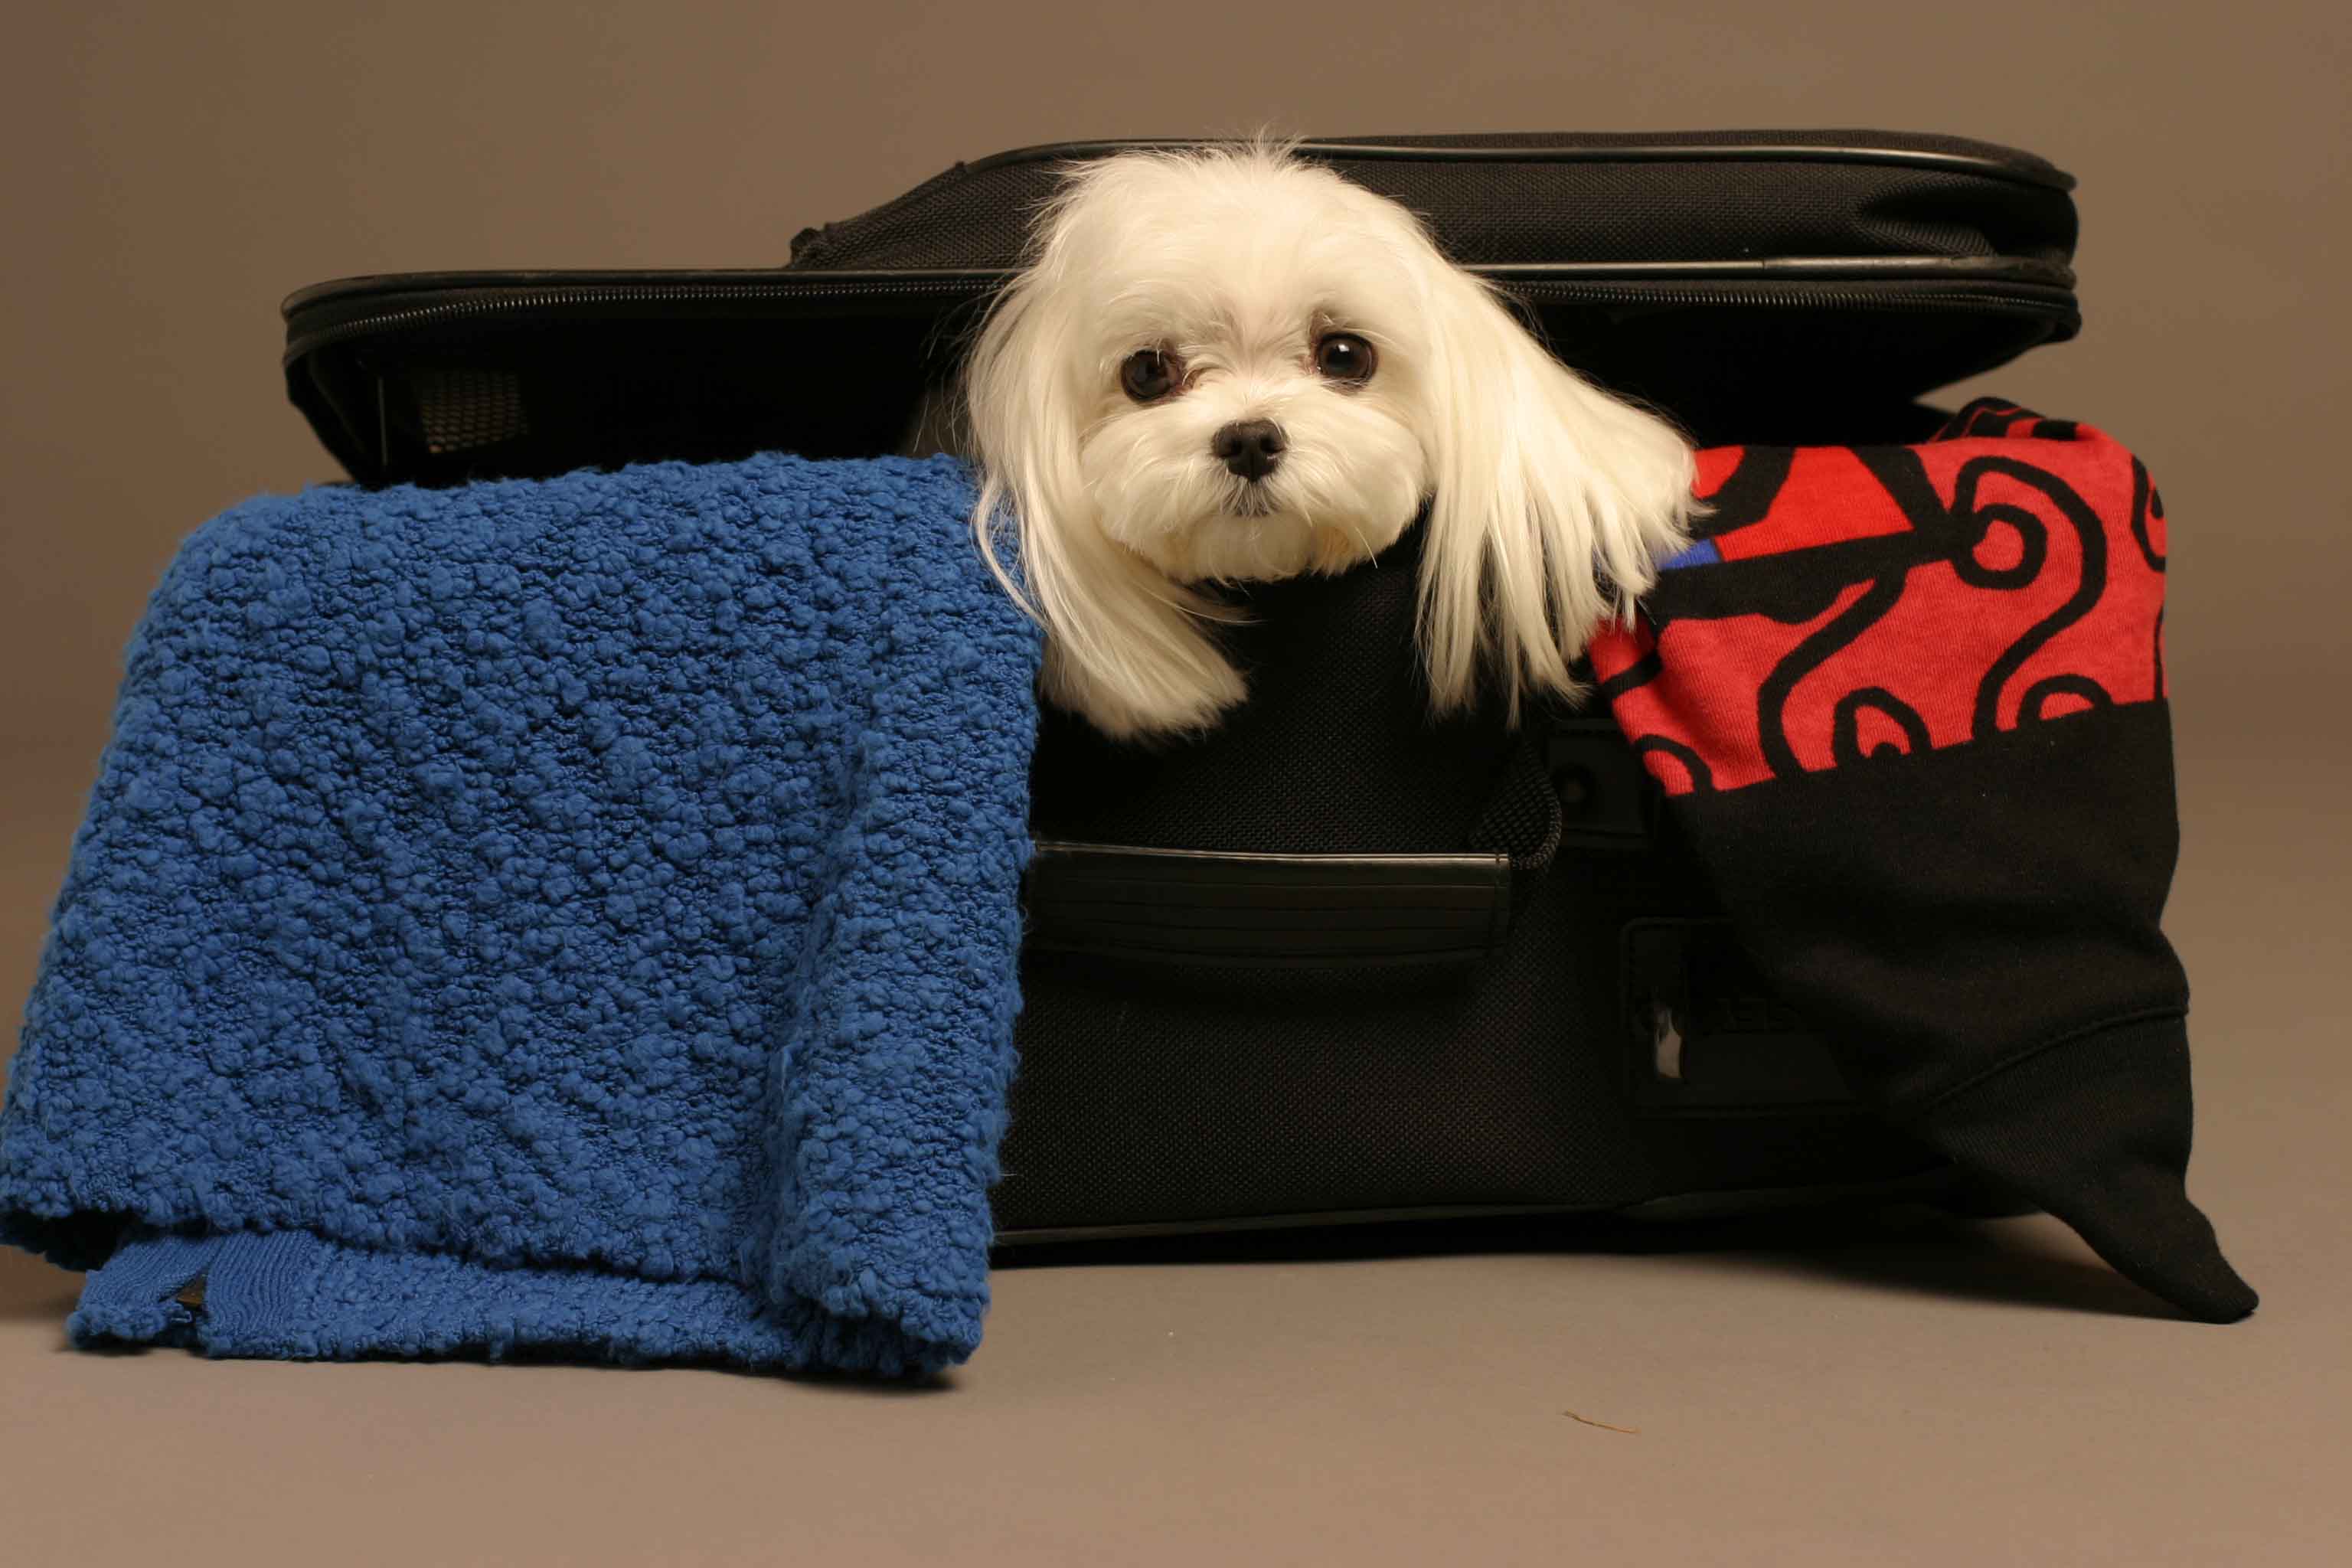 Finding dog friendly hotels with accommodations for your dog can be tricky